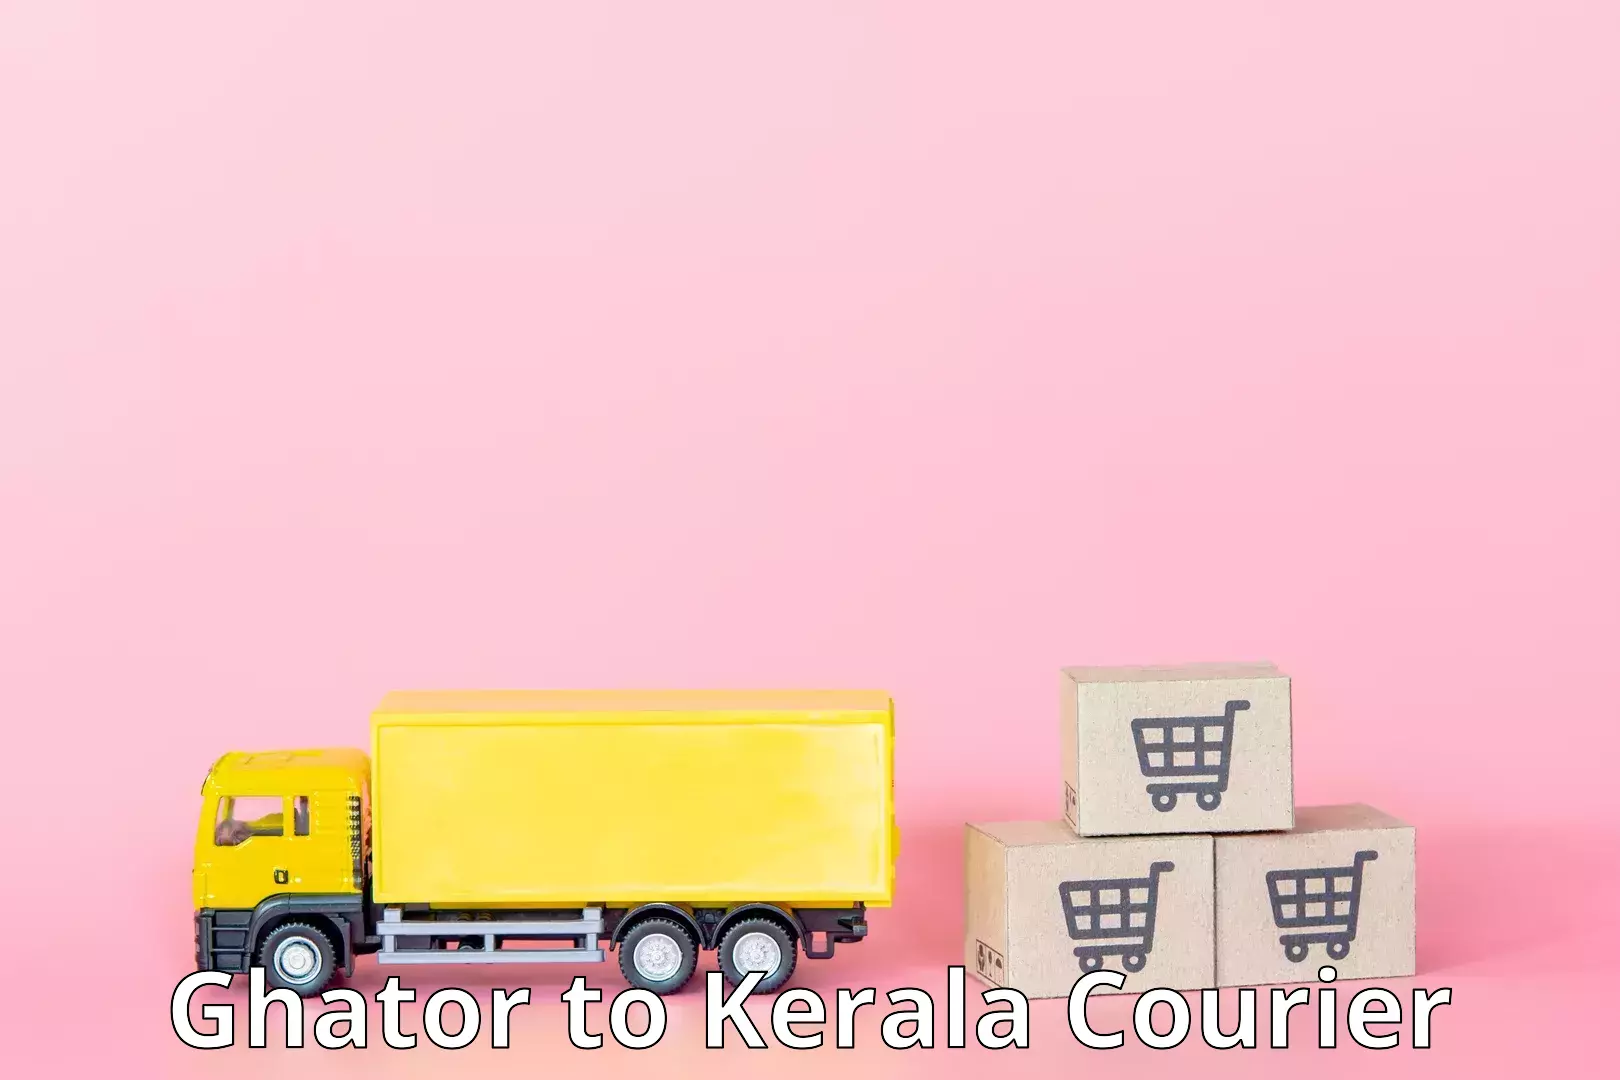 Personal parcel delivery Ghator to Thrissur